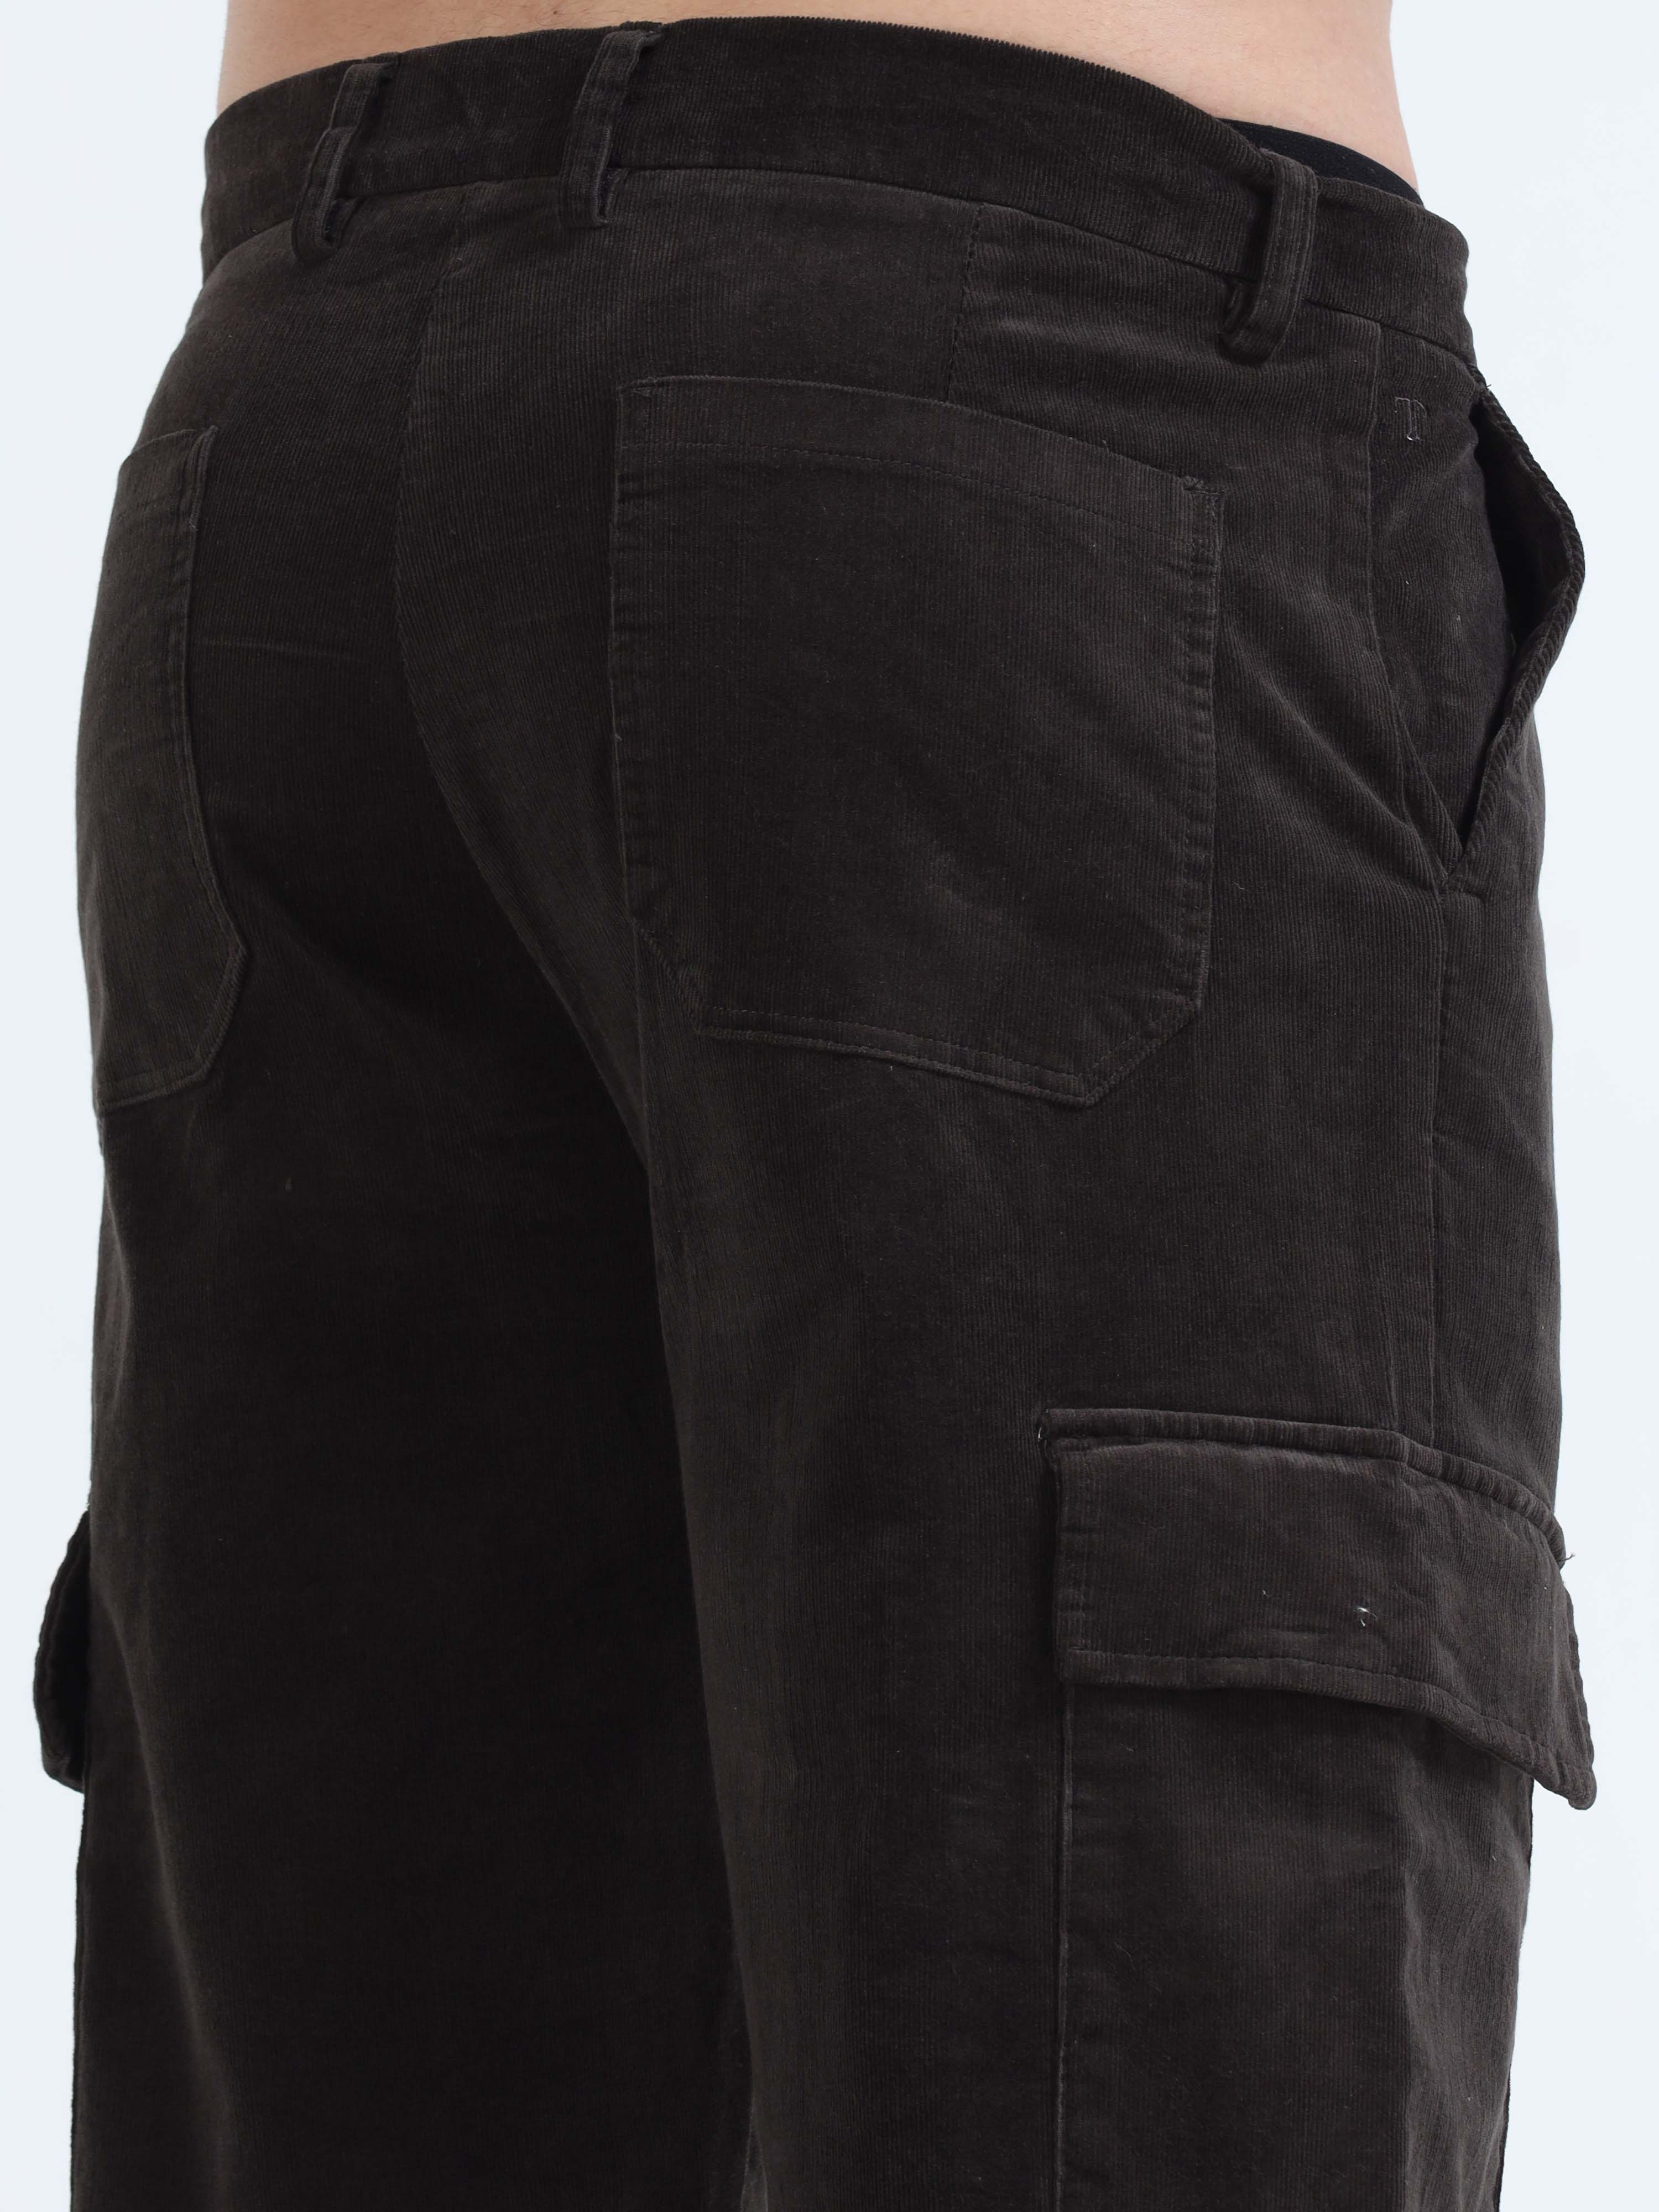 Soft Corduroy Dark Olive Relaxed Cargo Pant